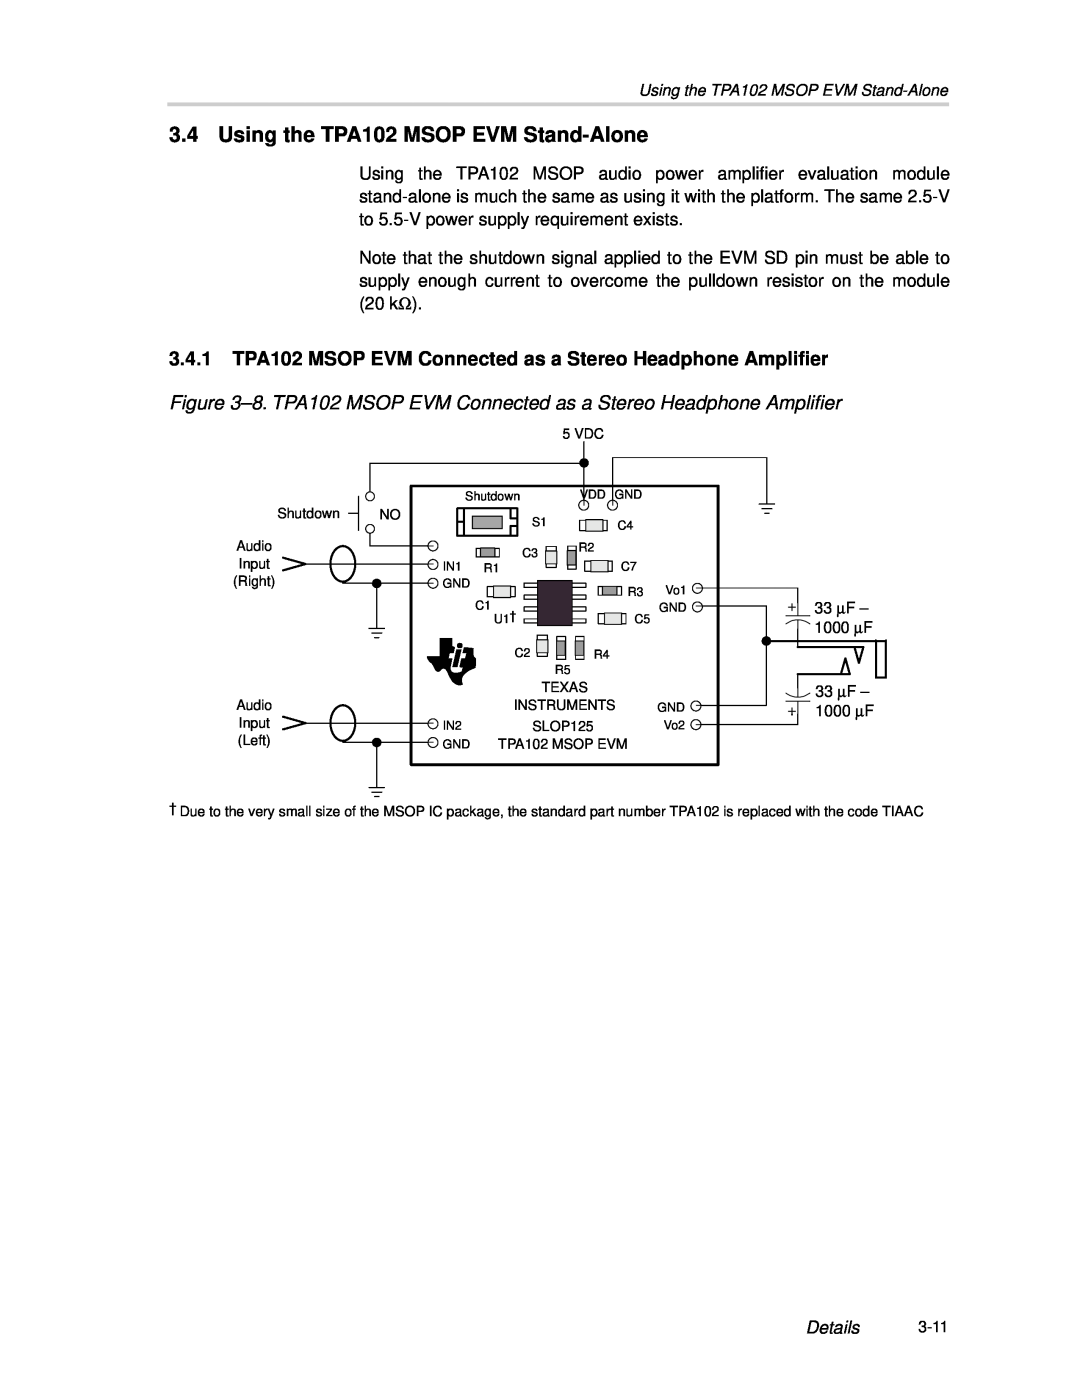 Texas Instruments manual Using the TPA102 MSOP EVM Stand-Alone, Details 